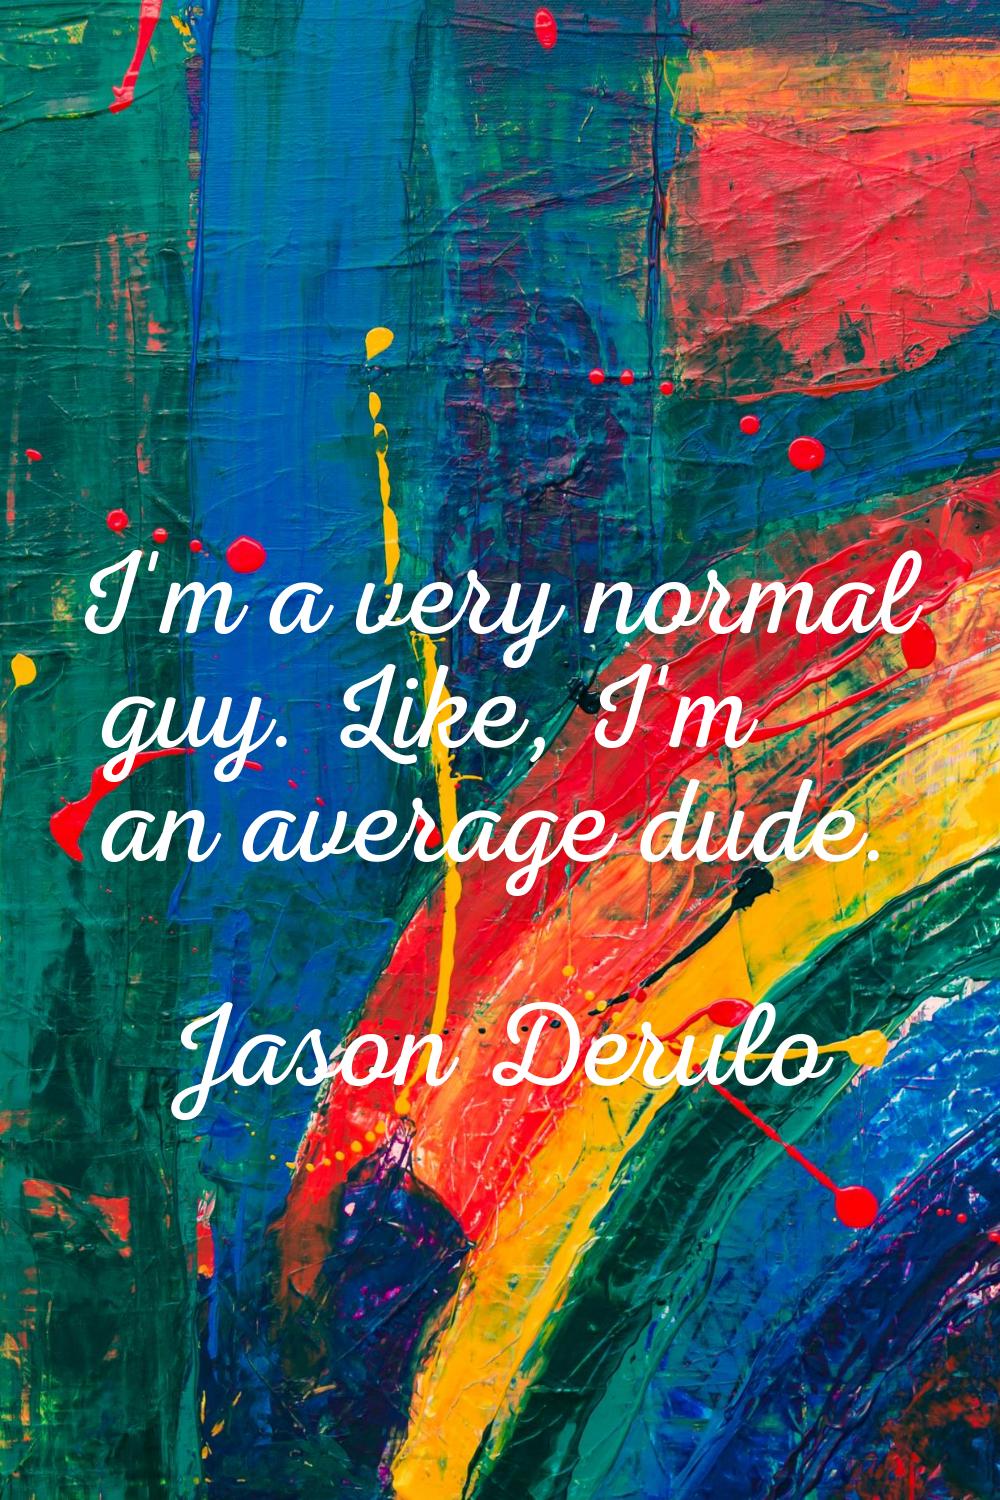 I'm a very normal guy. Like, I'm an average dude.